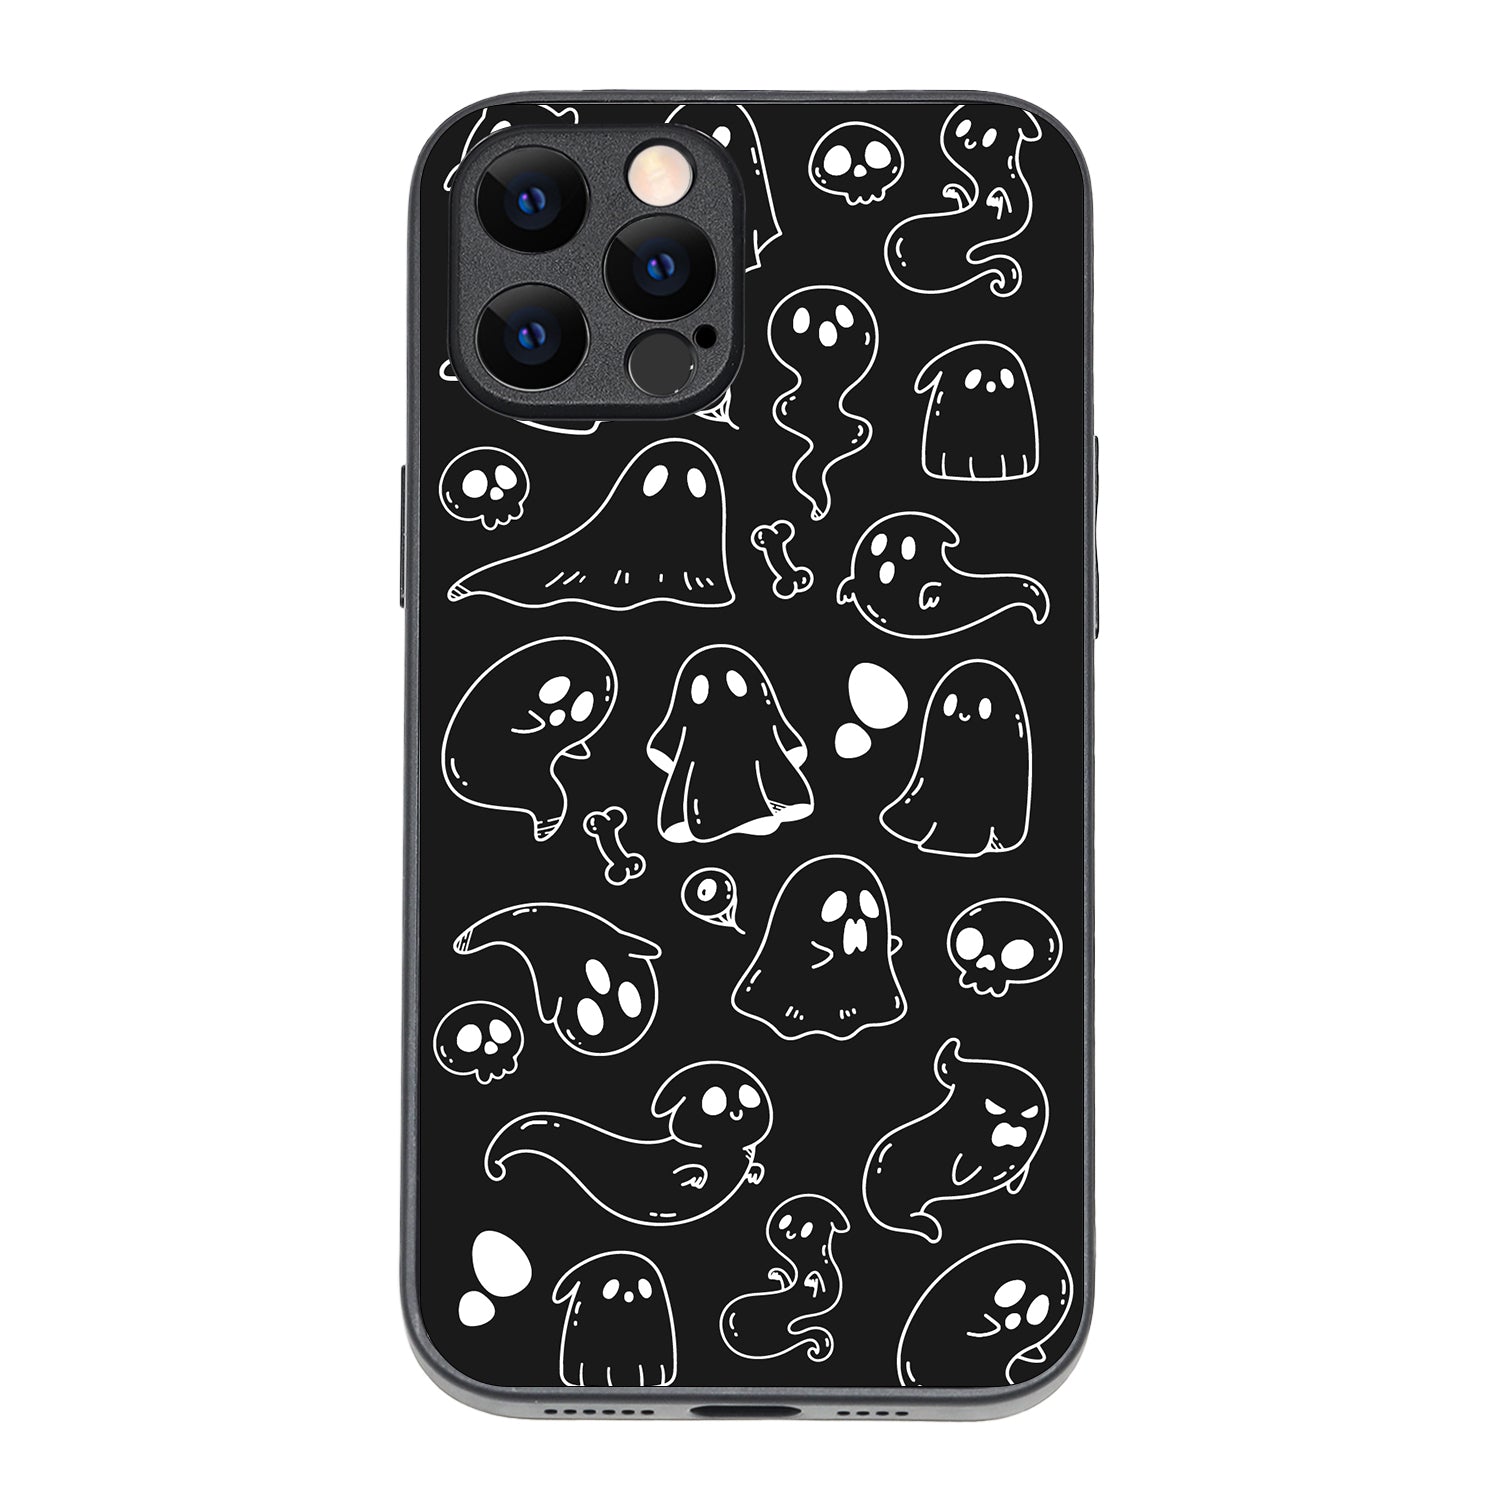 Black Ghost Doodle iPhone 12 Pro Max Case